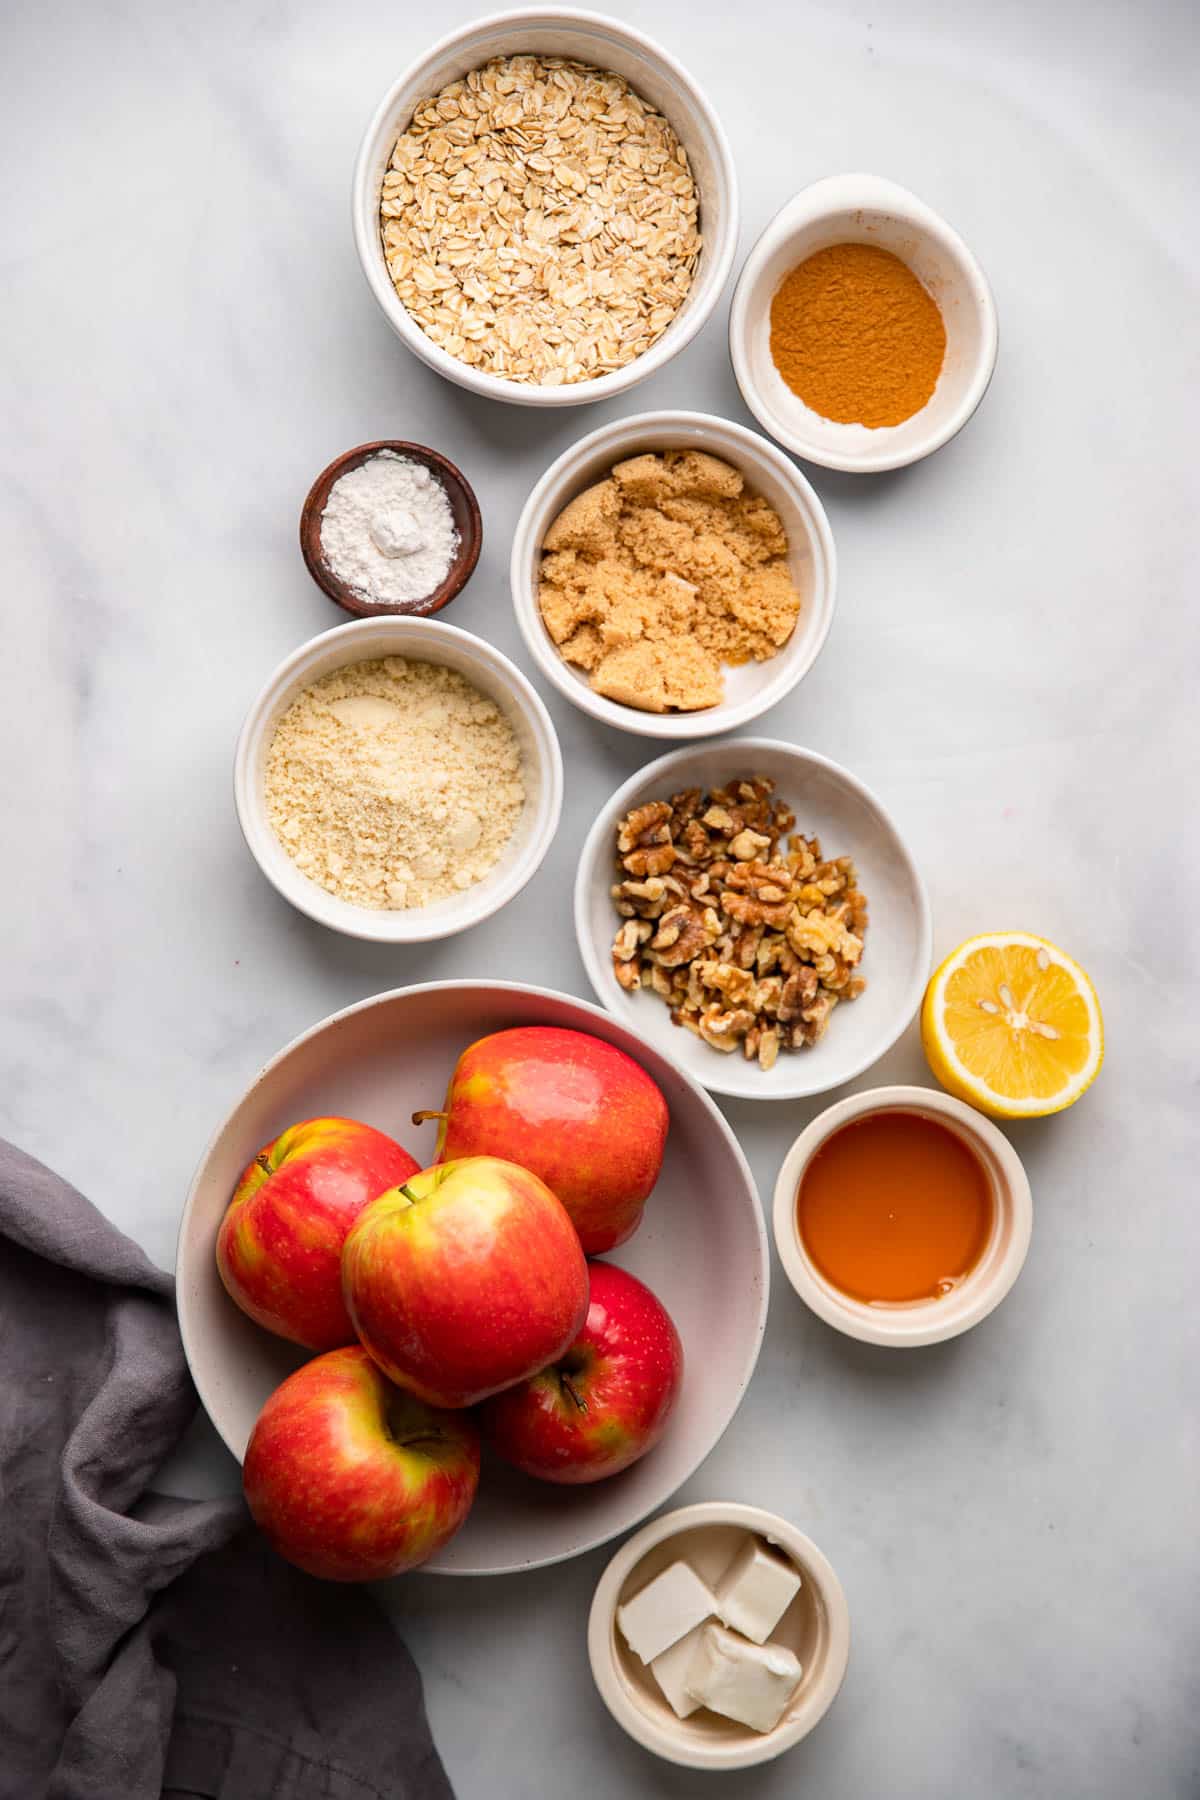 healthy apple crisp ingredients in small bowls on a white background.